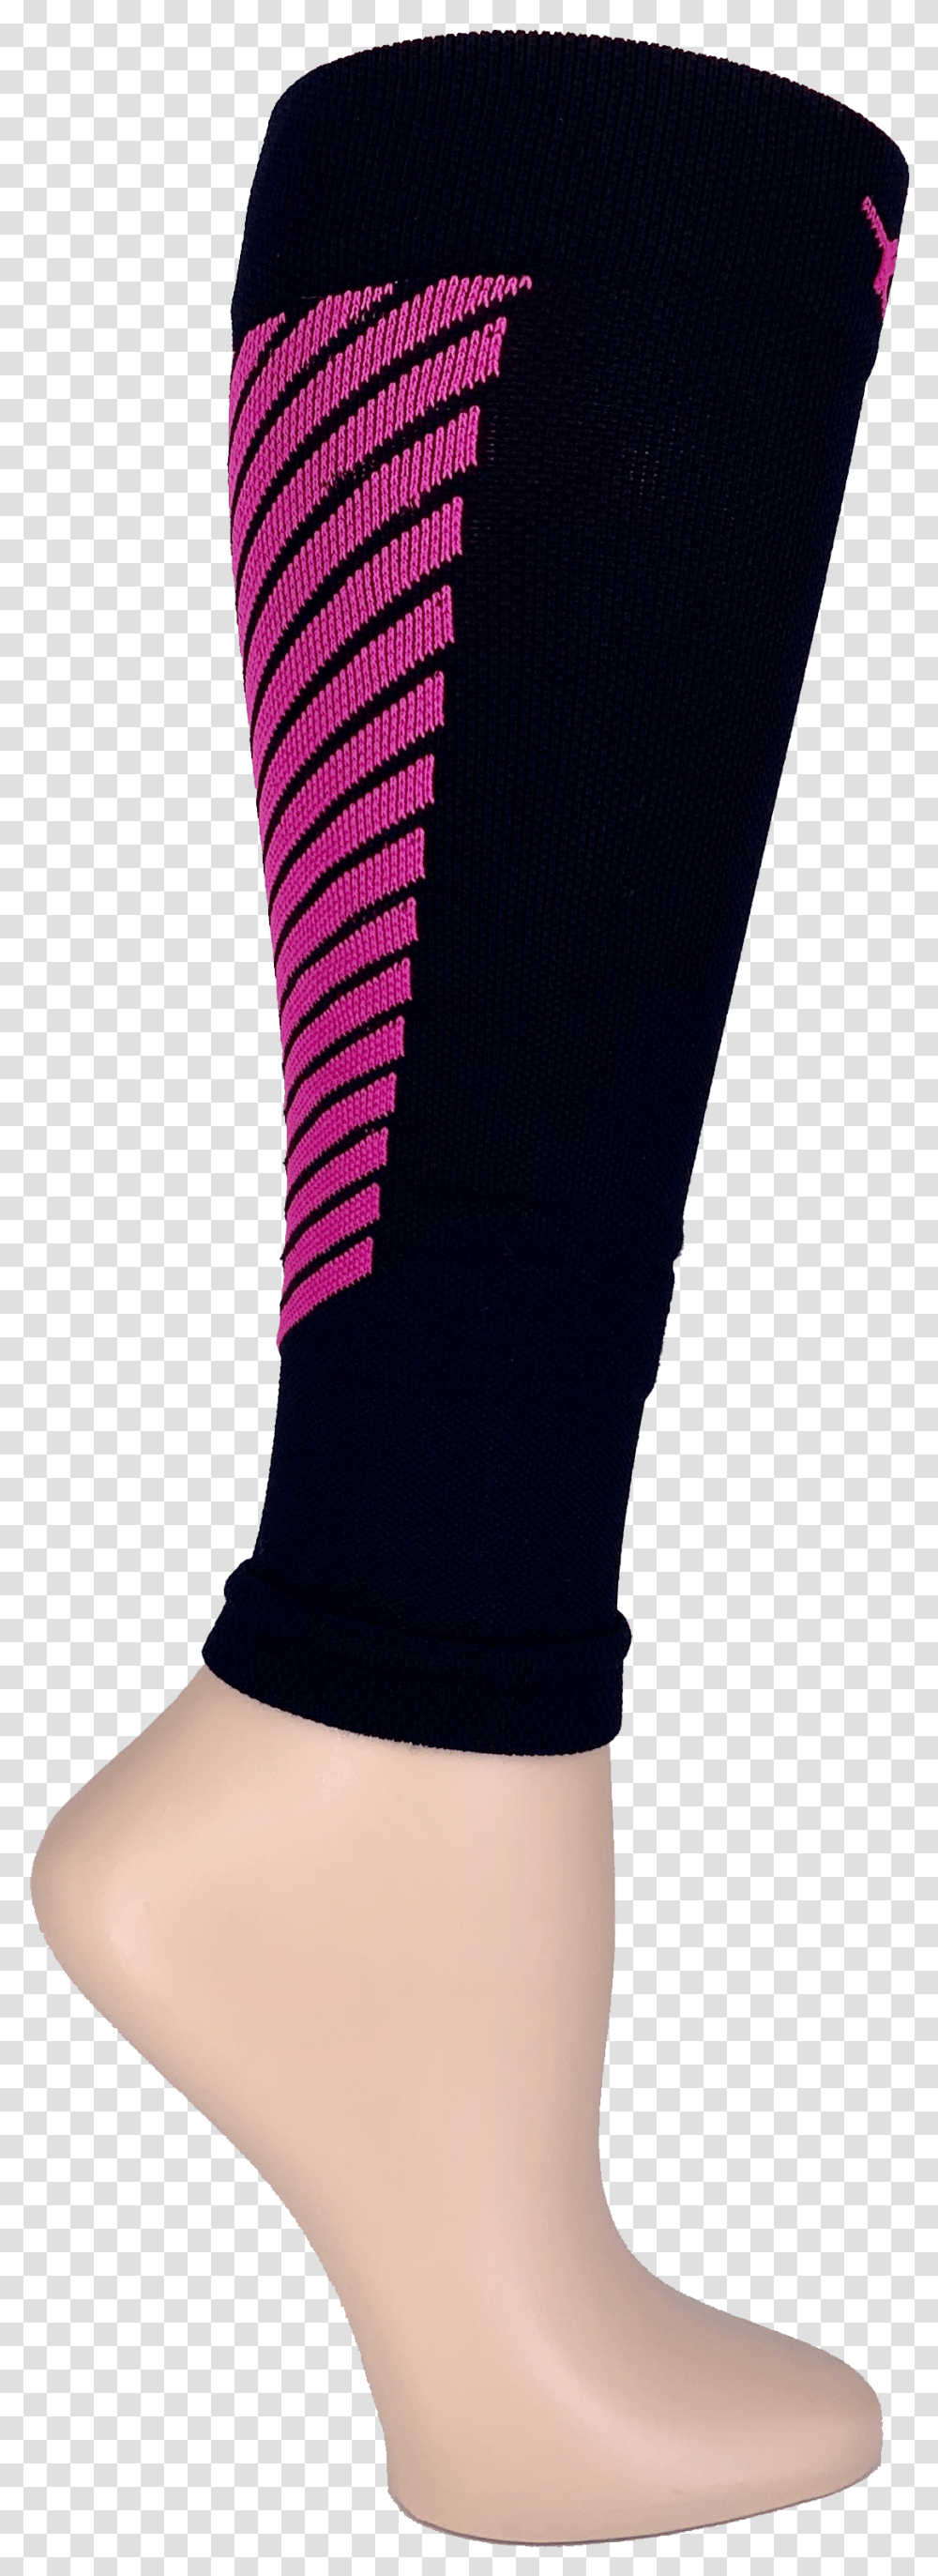 Black & Neon Pink Arrow Sleeve 15 20 Mmhg Shoe, Clothing, Apparel, Footwear, Person Transparent Png